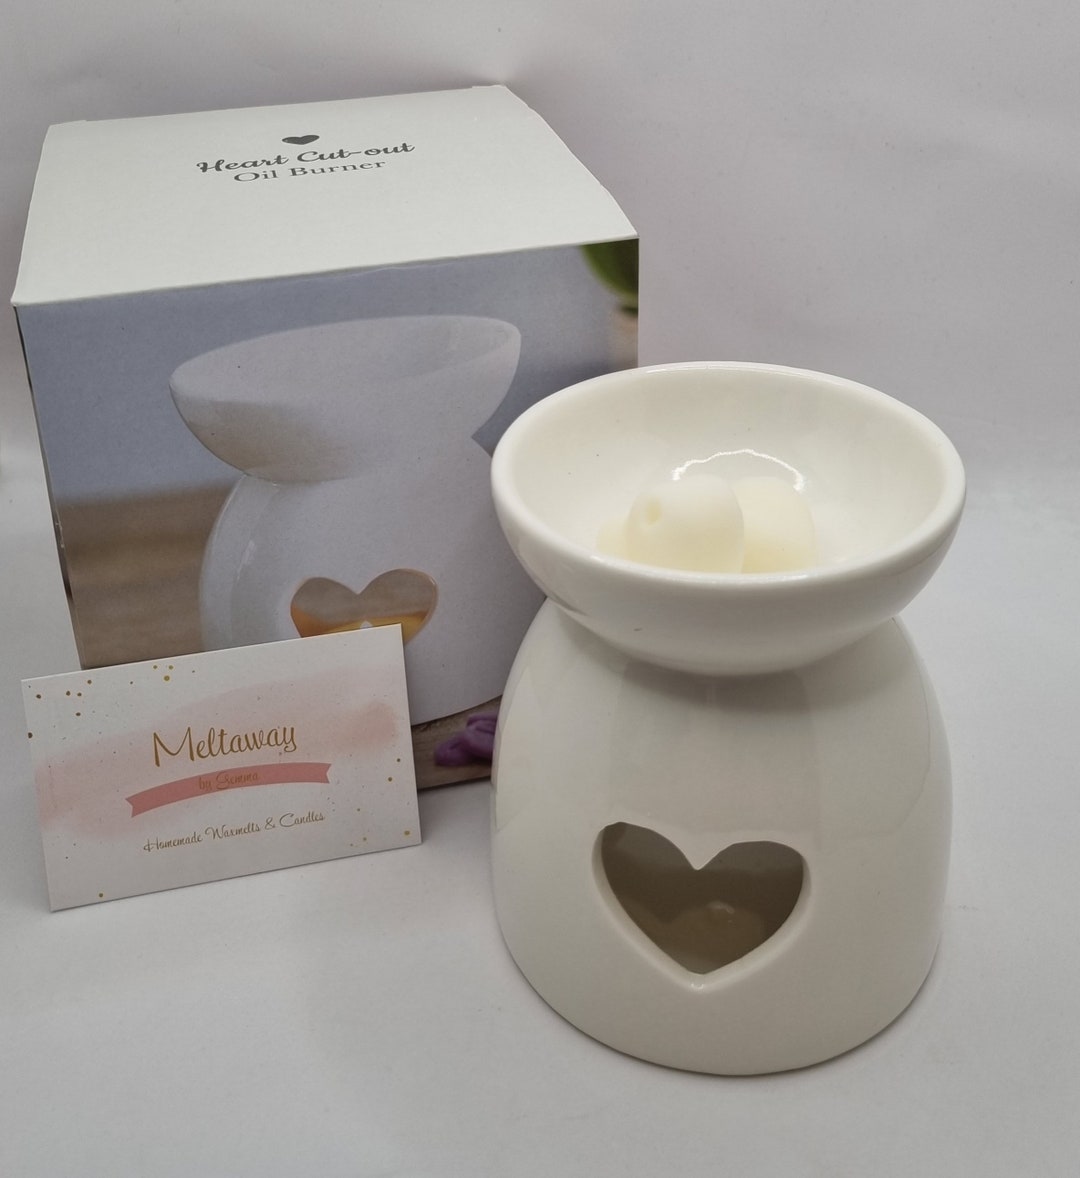 Ceramic Wax Burner with Cut Out Design - Coull Scents